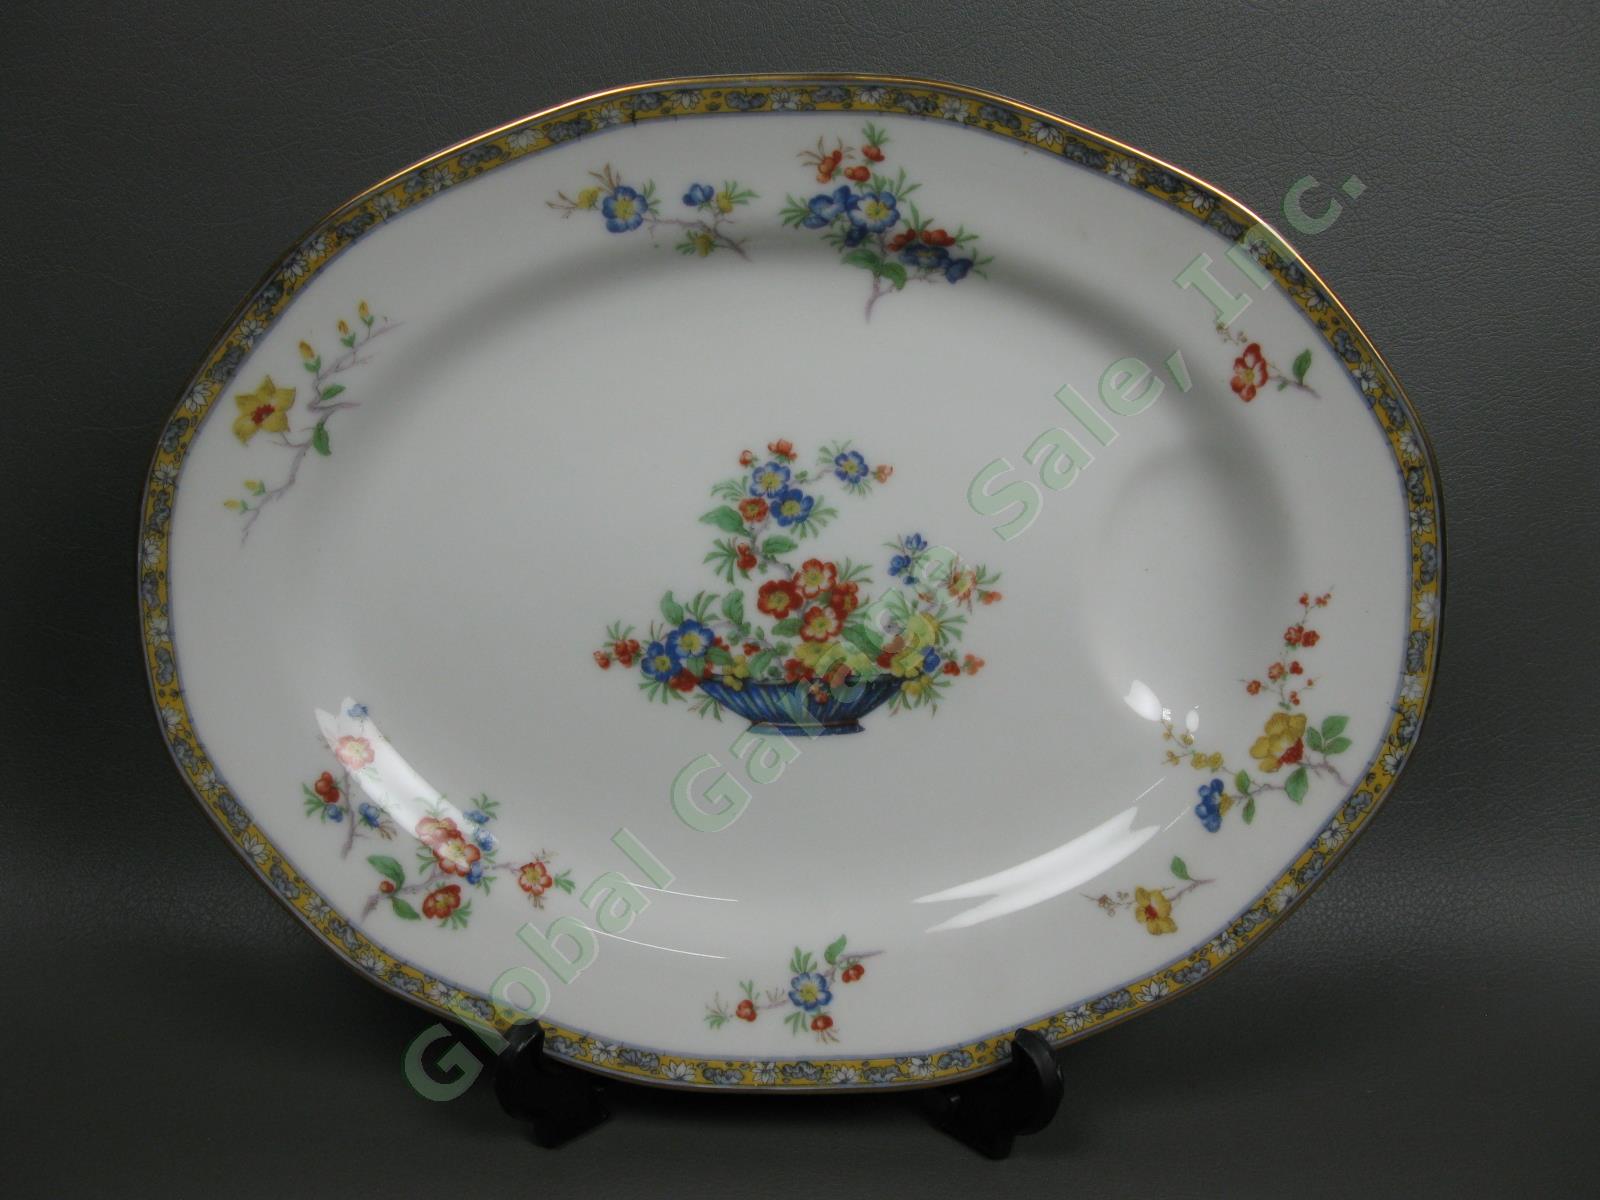 Theodore Haviland Montreux Mongolia 11" Oval Serving Platter Floral Tray Limoges